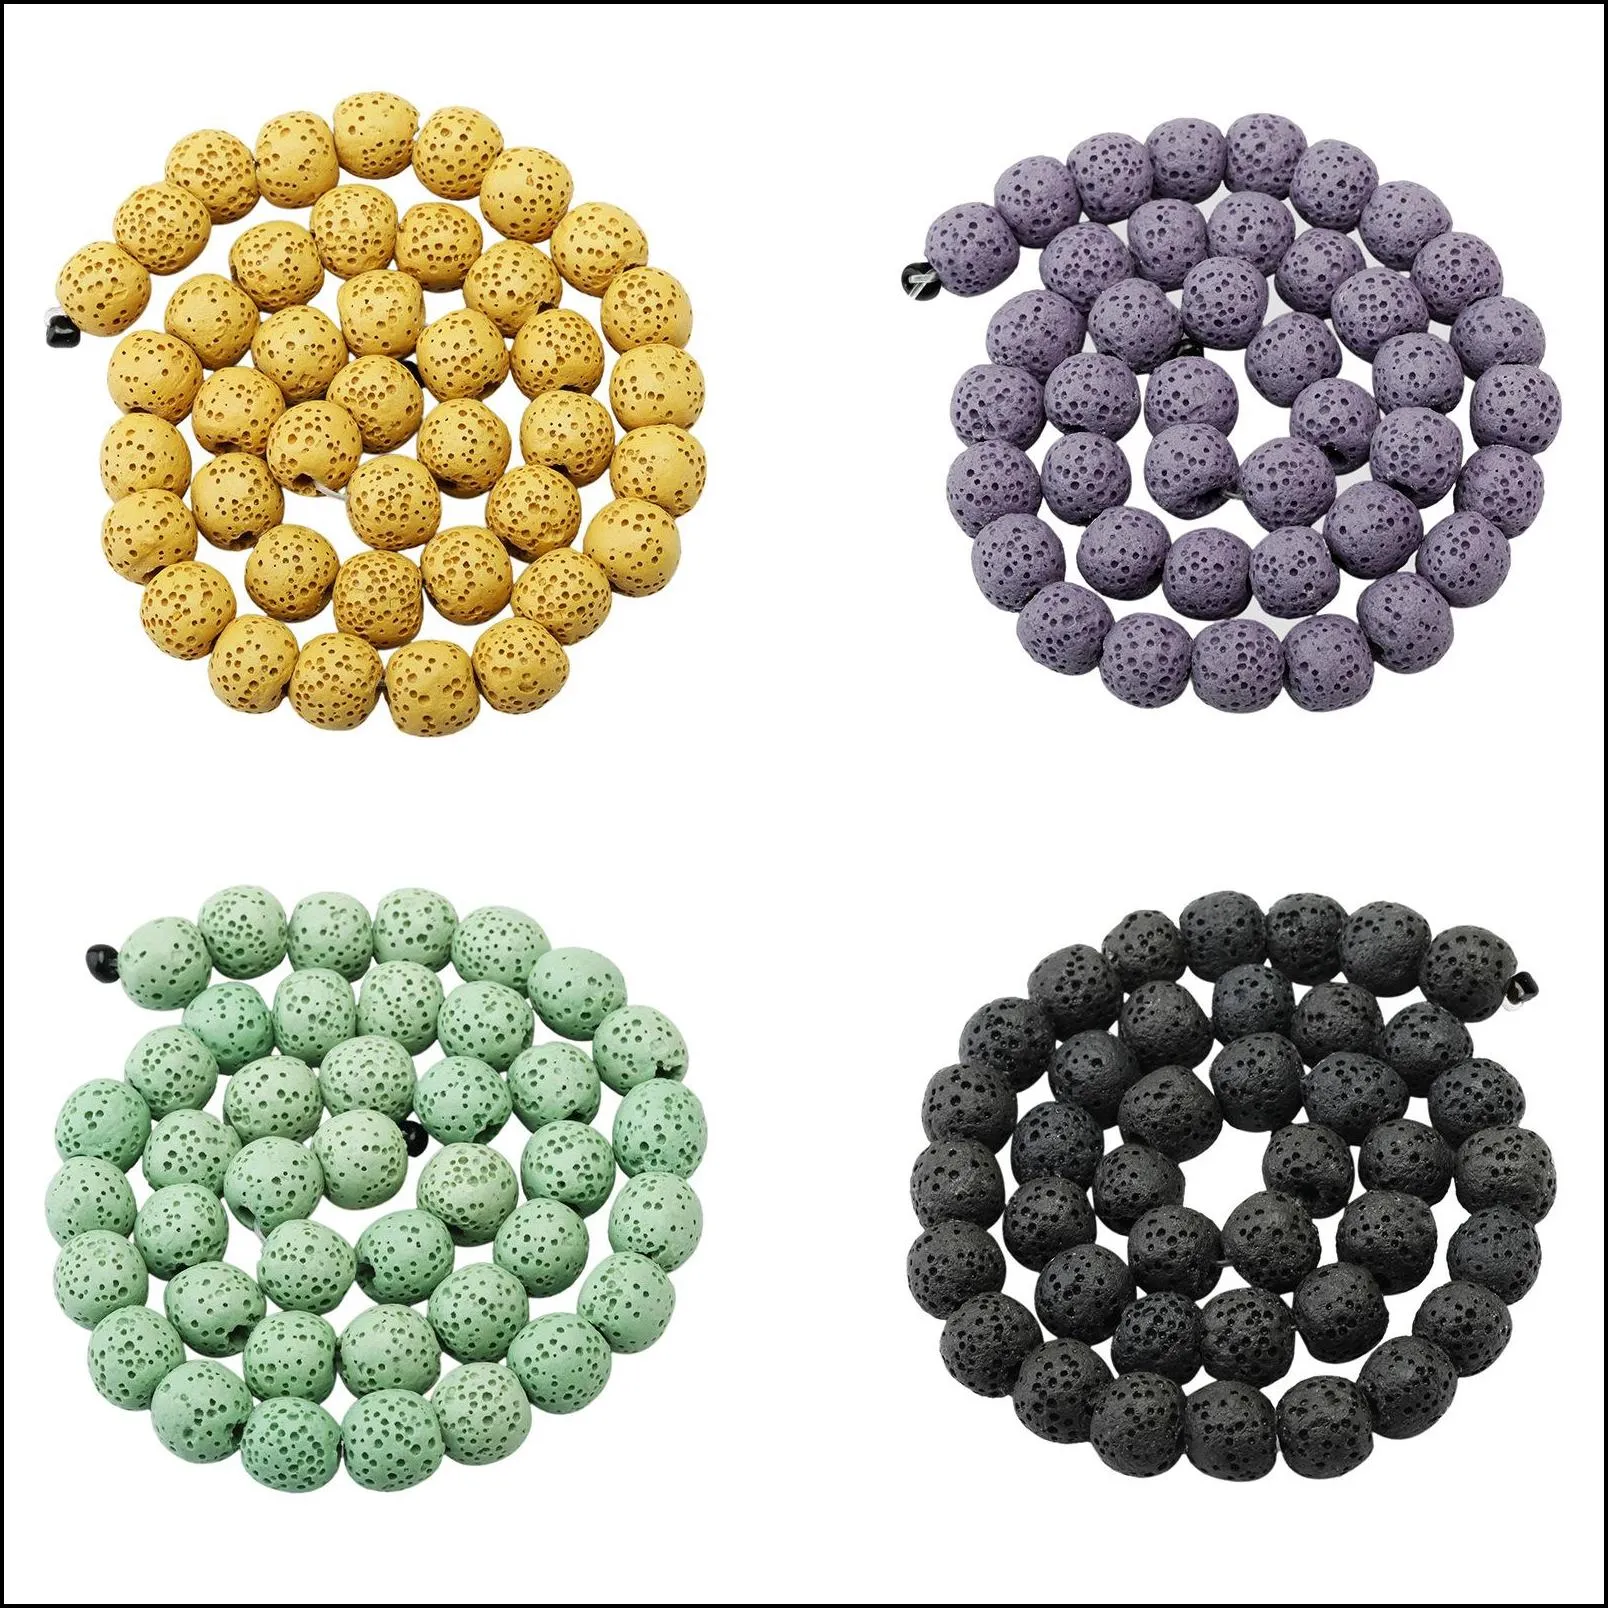 loose 12mm natural rock lava stone round beads for making jewelry necklace bracelet earrings rings craft healing raw volcanic gemstone quartz